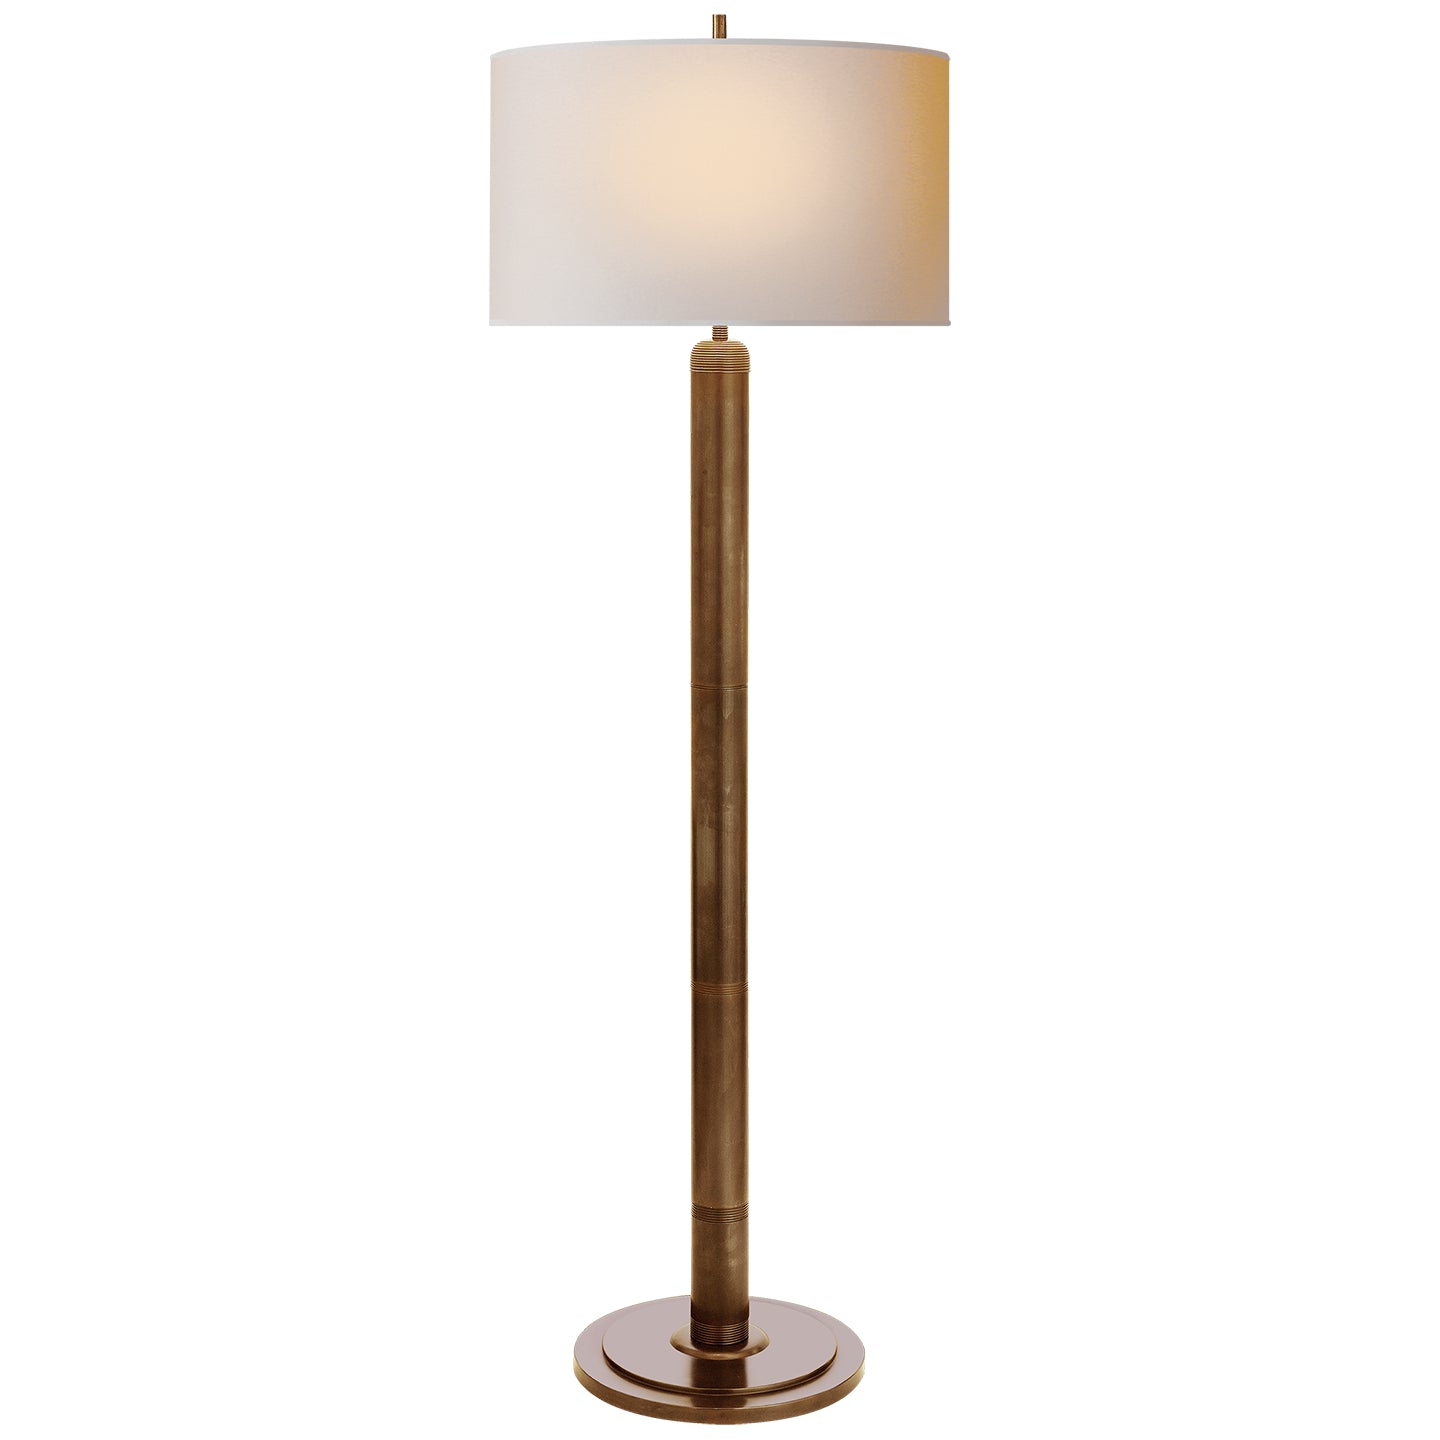 Load image into Gallery viewer, Visual Comfort Signature - TOB 1000HAB-NP - Two Light Floor Lamp - Longacre - Hand-Rubbed Antique Brass
